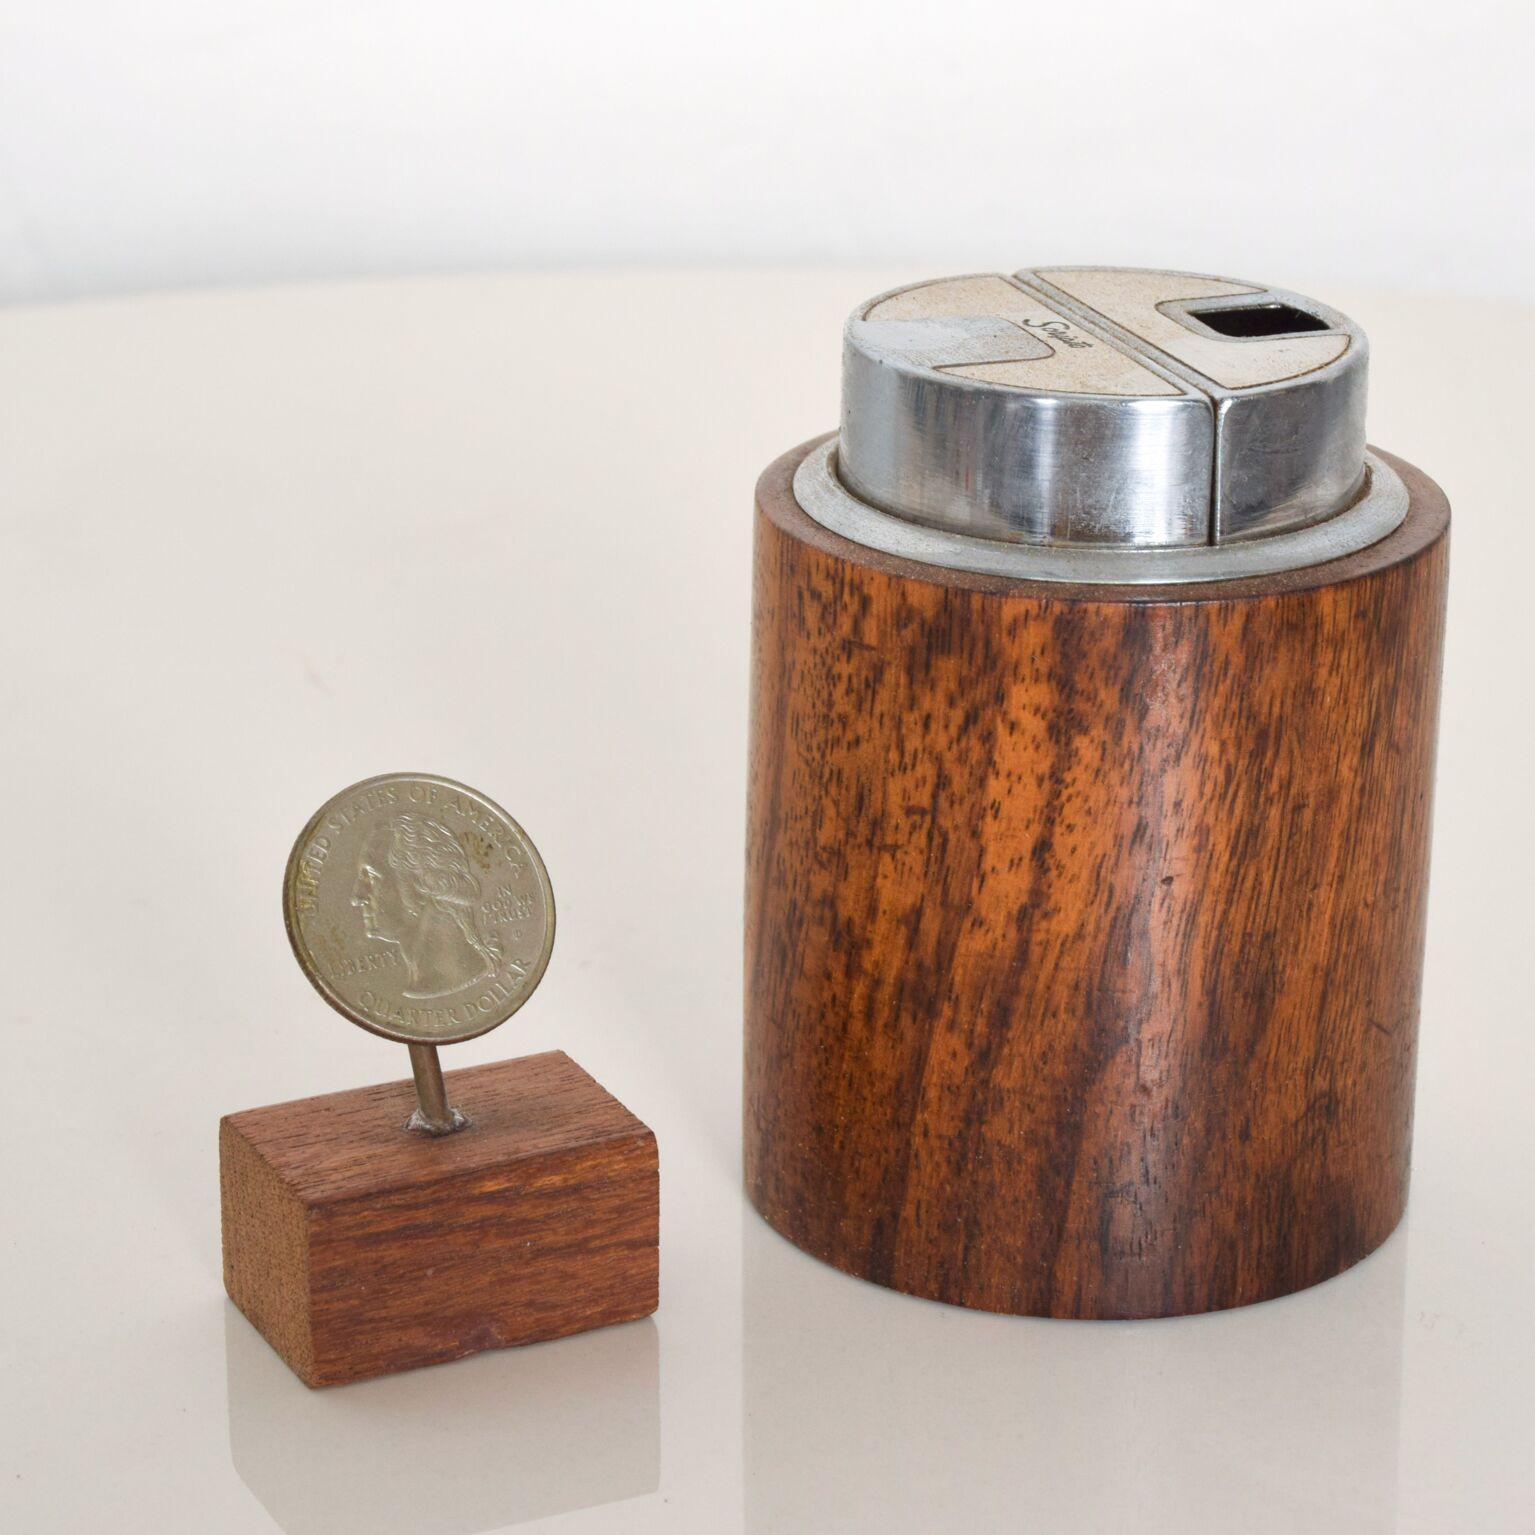 For your consideration: Really special vintage Japanese Lighter made in Japan by Scripto. Rare model in solid rosewood case with stainless steel. Dimensions: 3 1/8